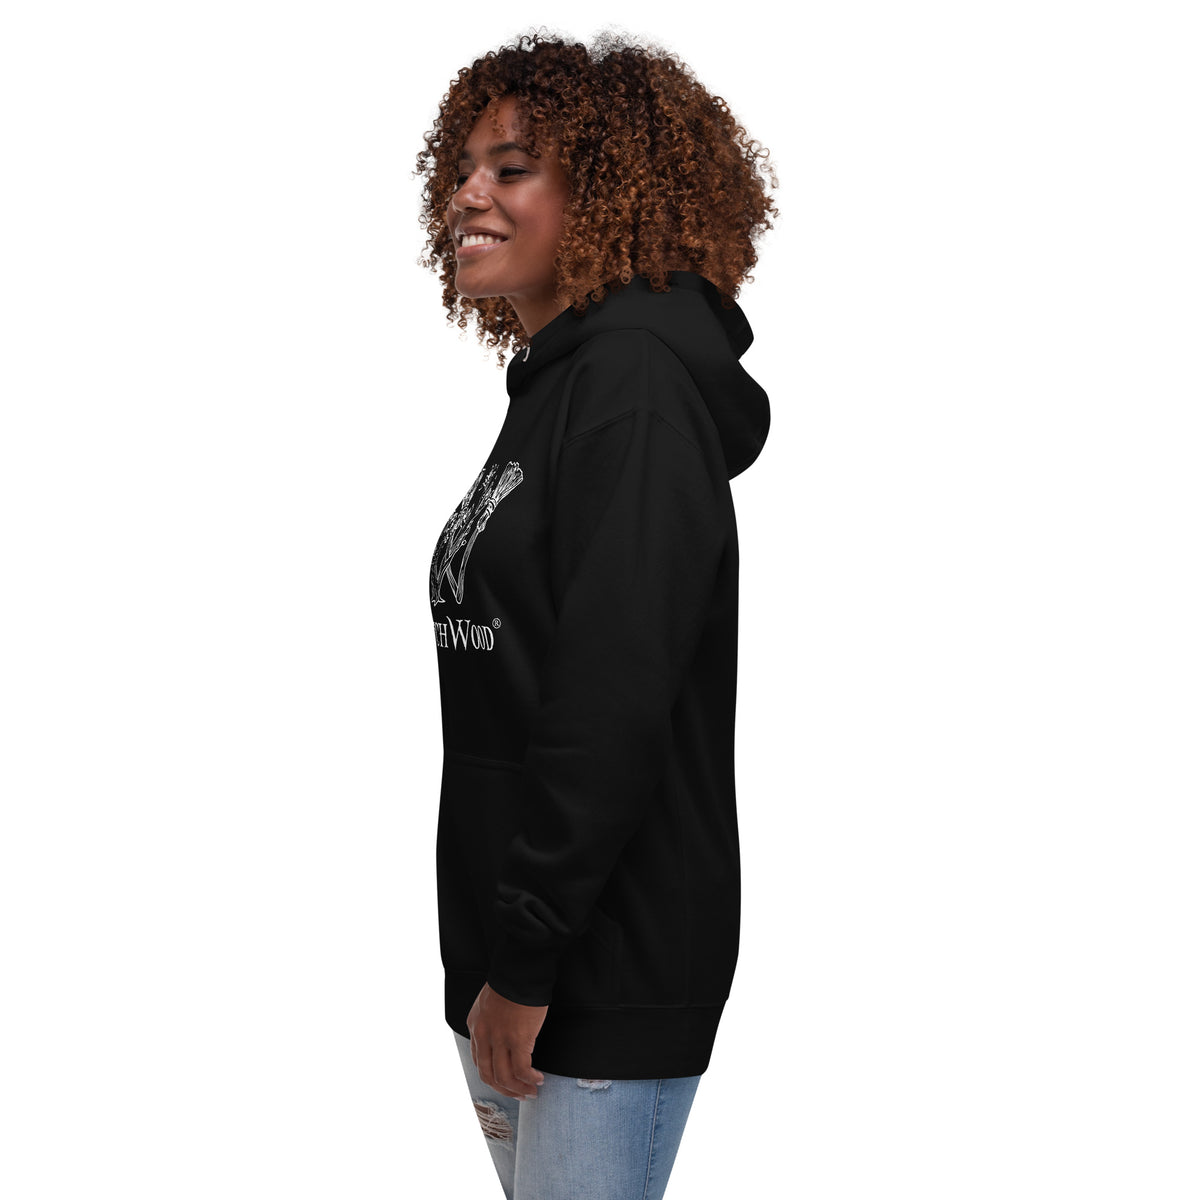 The WytchWood Coven Unisex Hoodie